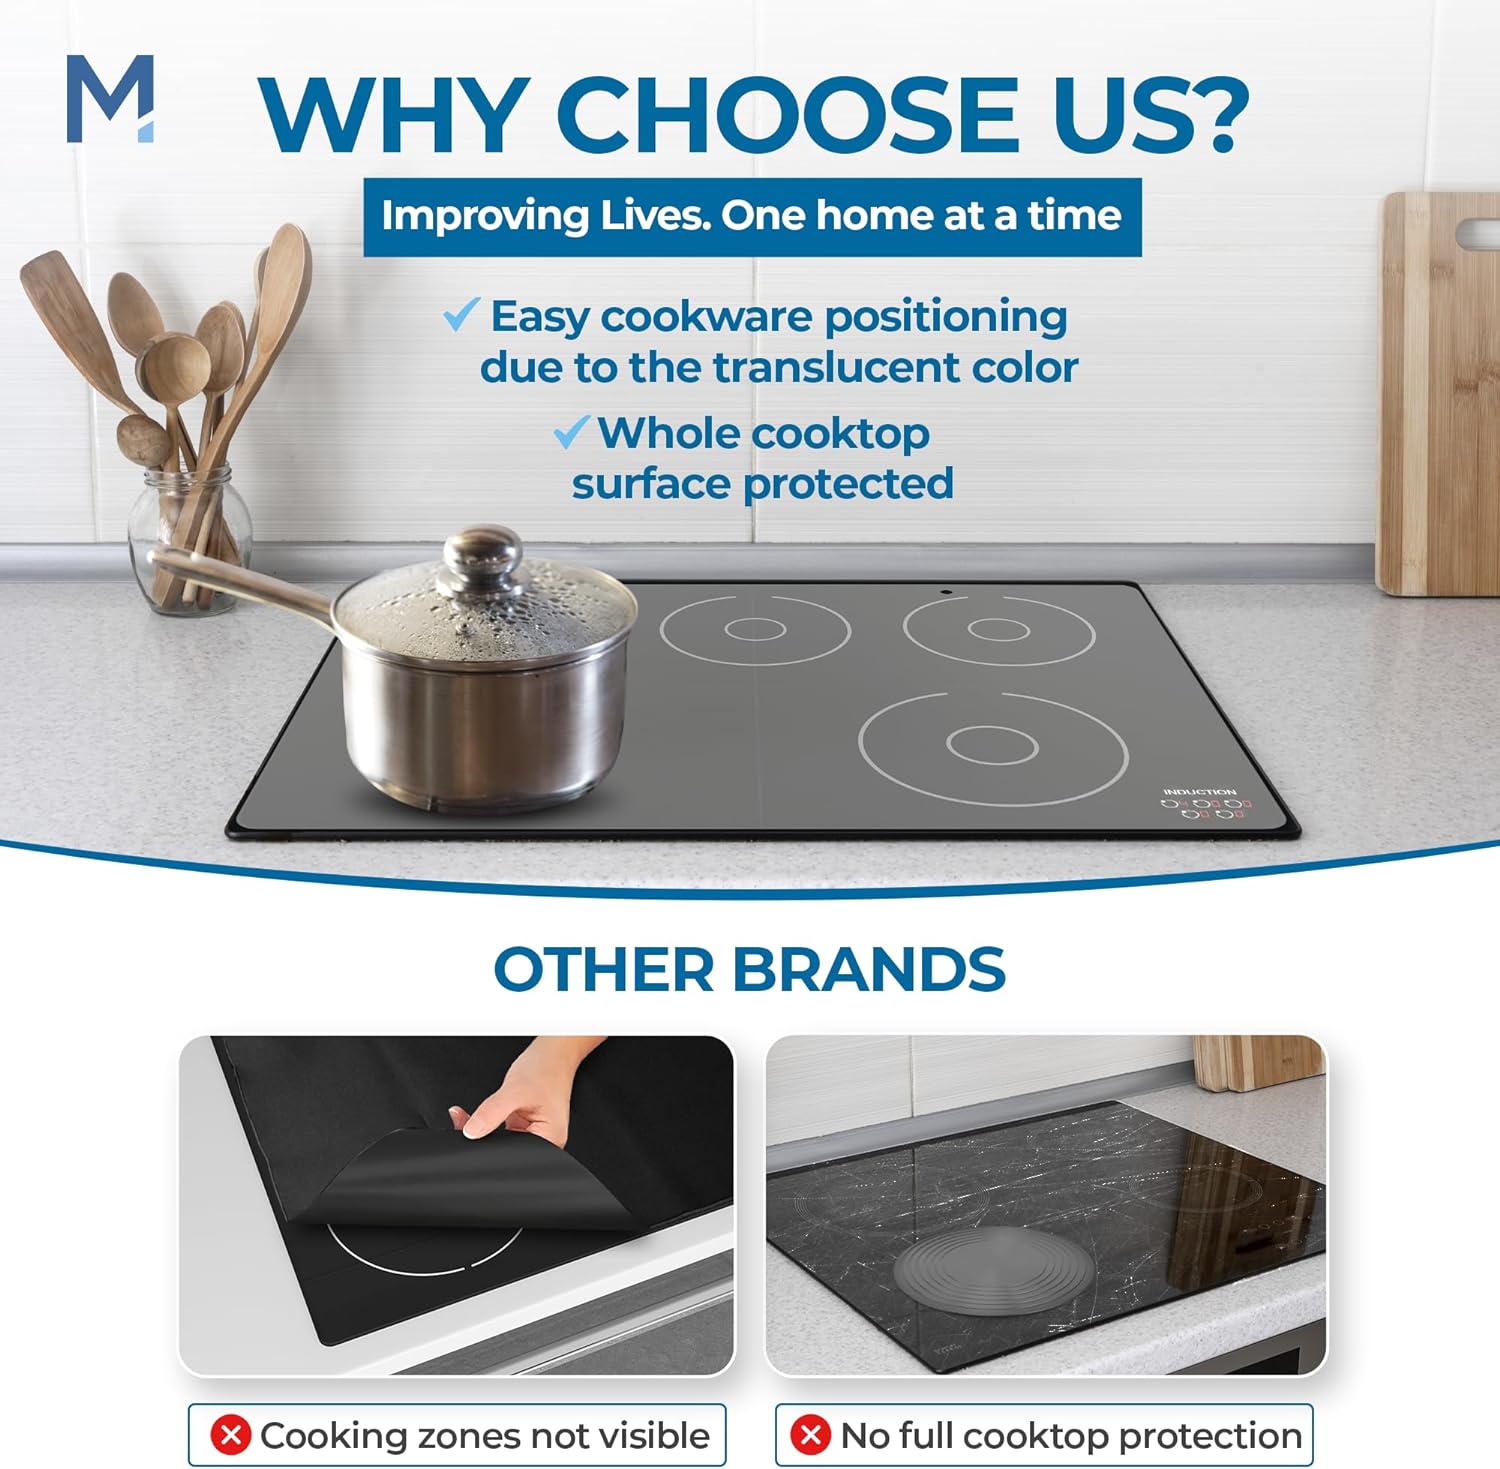 Lilymeche Concept - Induction Cooktop Mat, Household Silicone Inductio